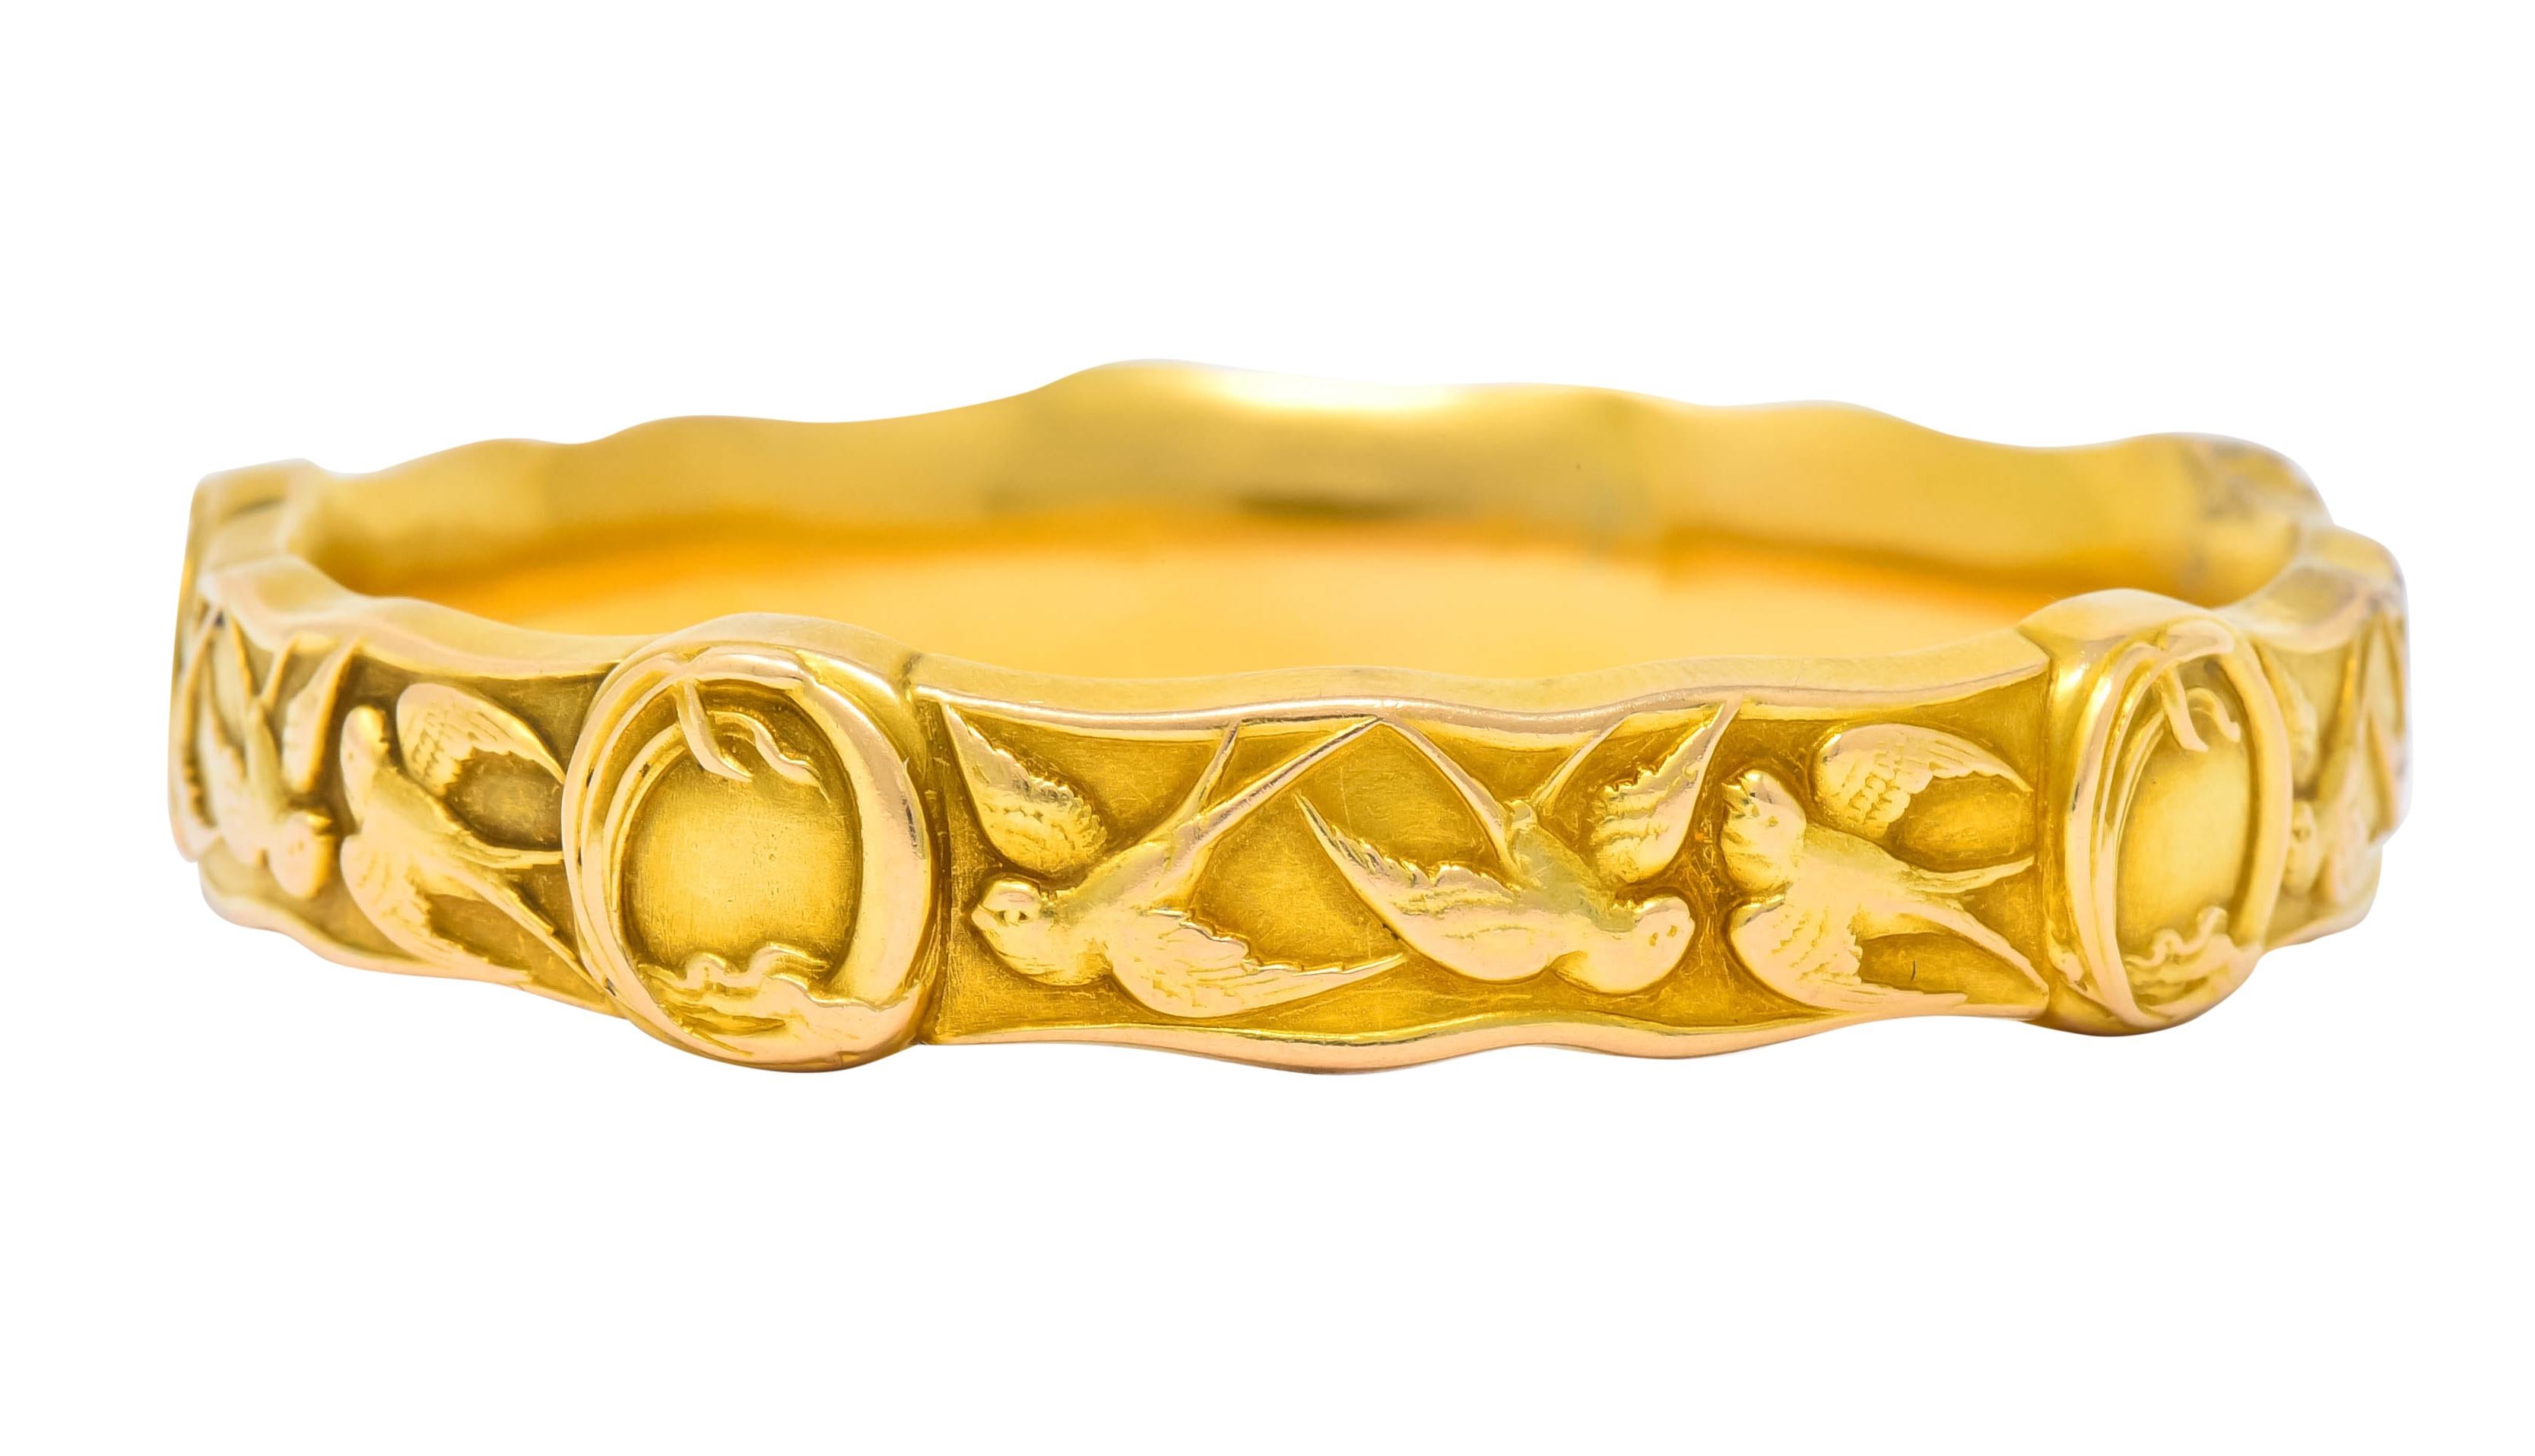 Designed as a wavy edged bangle bracelet decorated throughout by swallow motif in three different patterns of flight

Accented by five oval stations with raised stylized ribbon borders

With maker’s mark for Riker Brothers and stamped 14k for 14